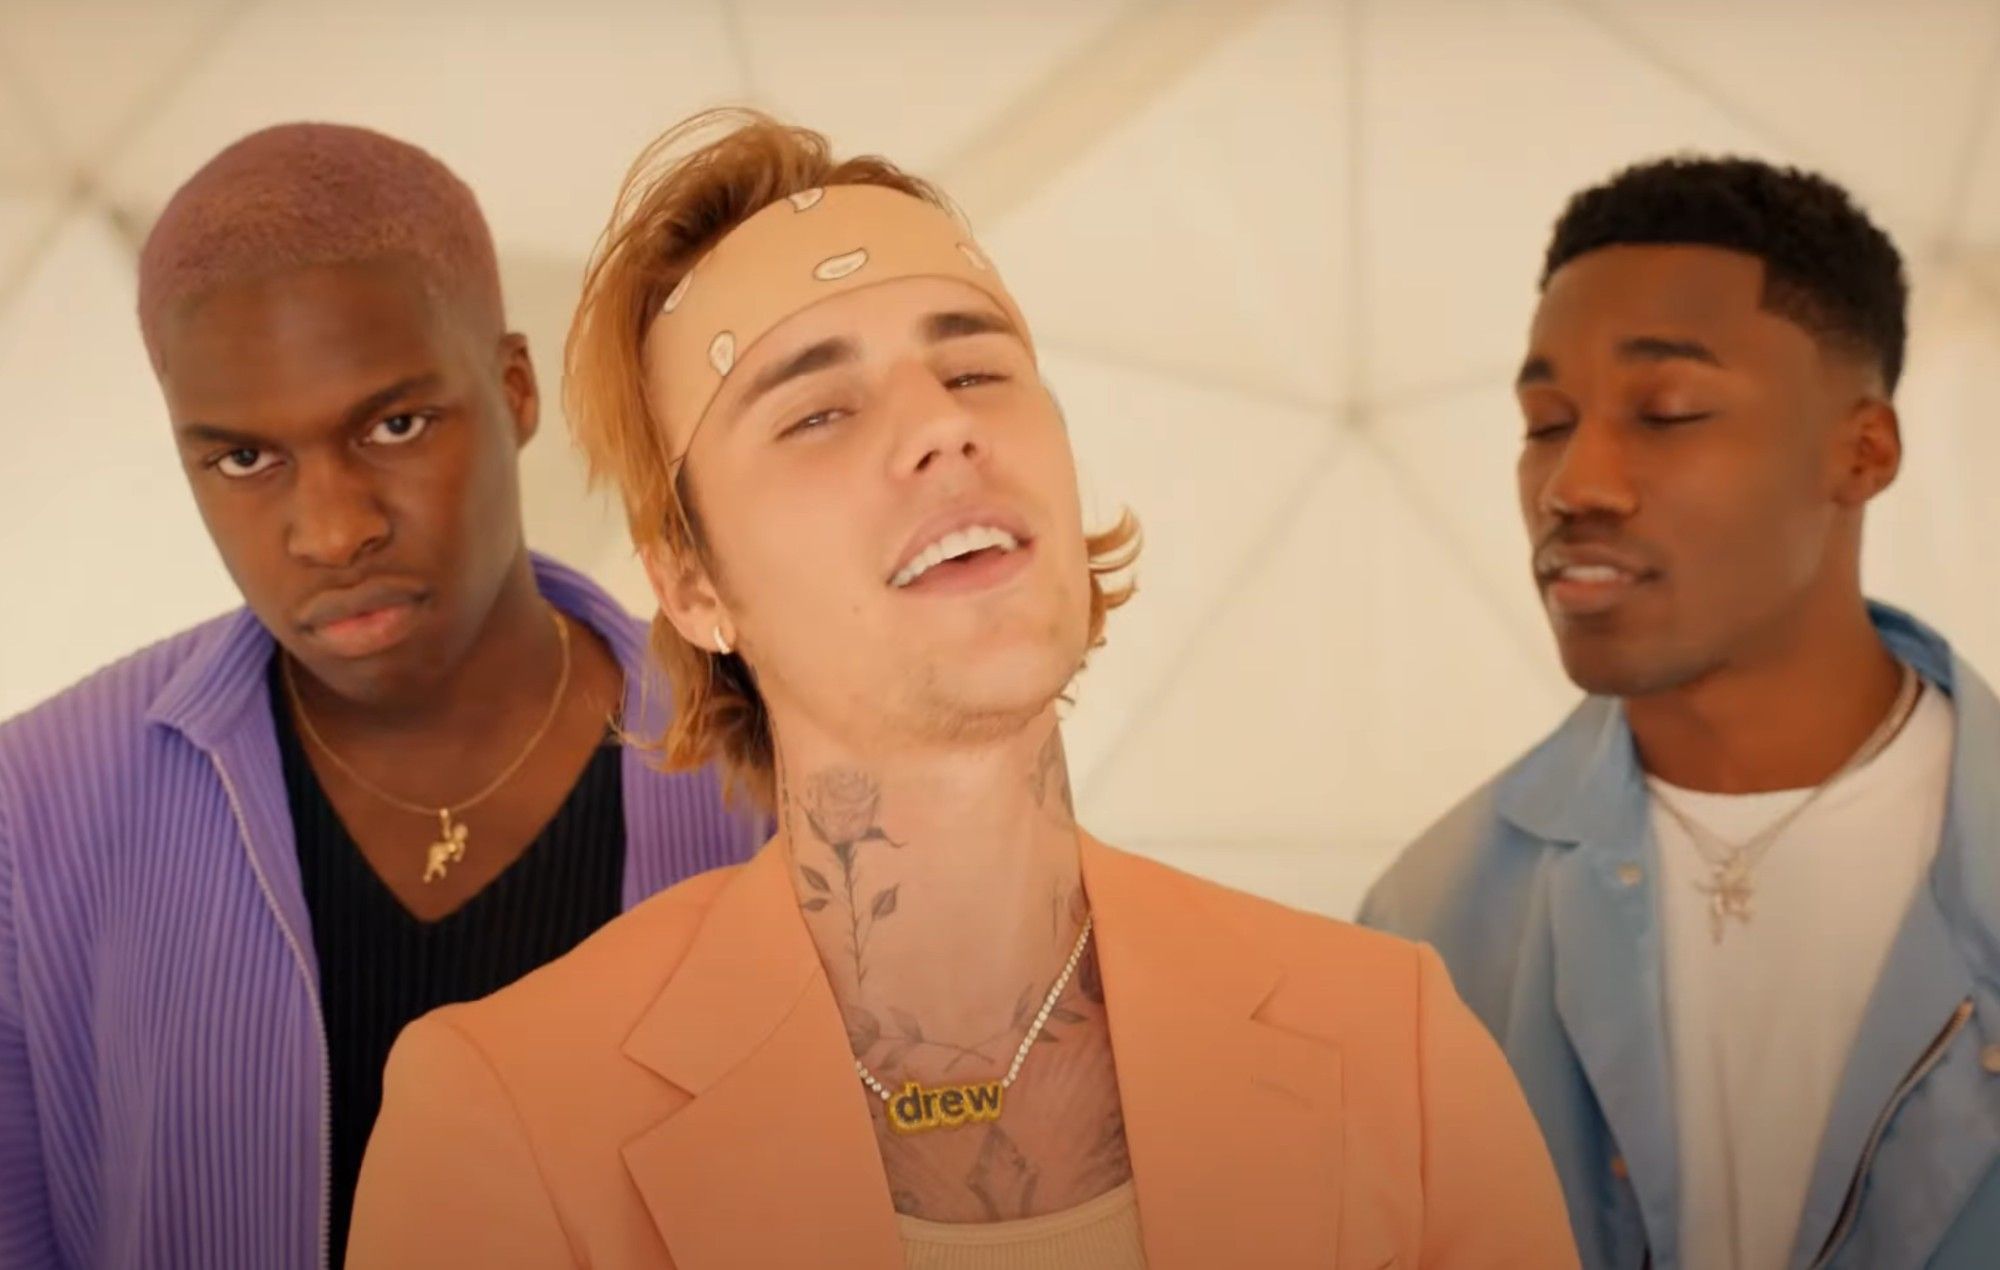 Justin Bieber shares music video for 'Peaches' to celebrate arrival of new album 'Justice'